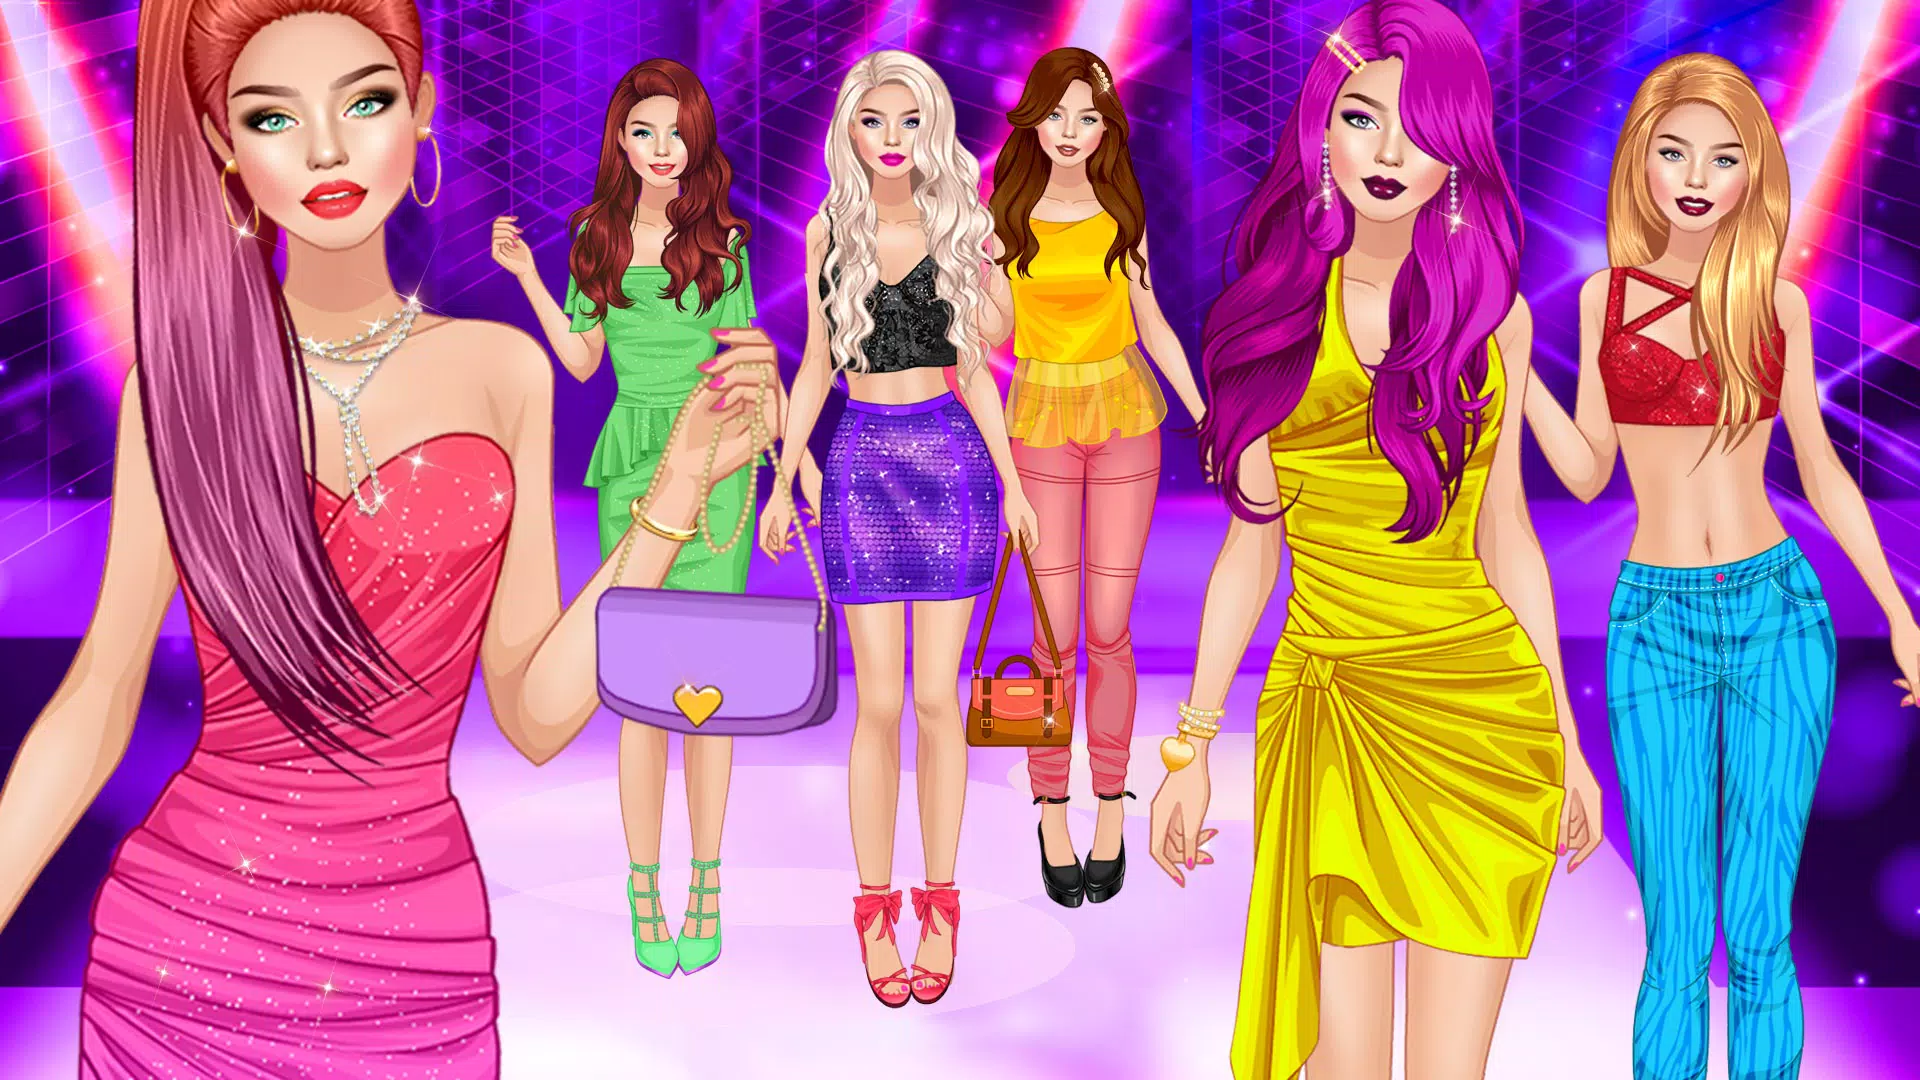 Dress Up - Games for Girls